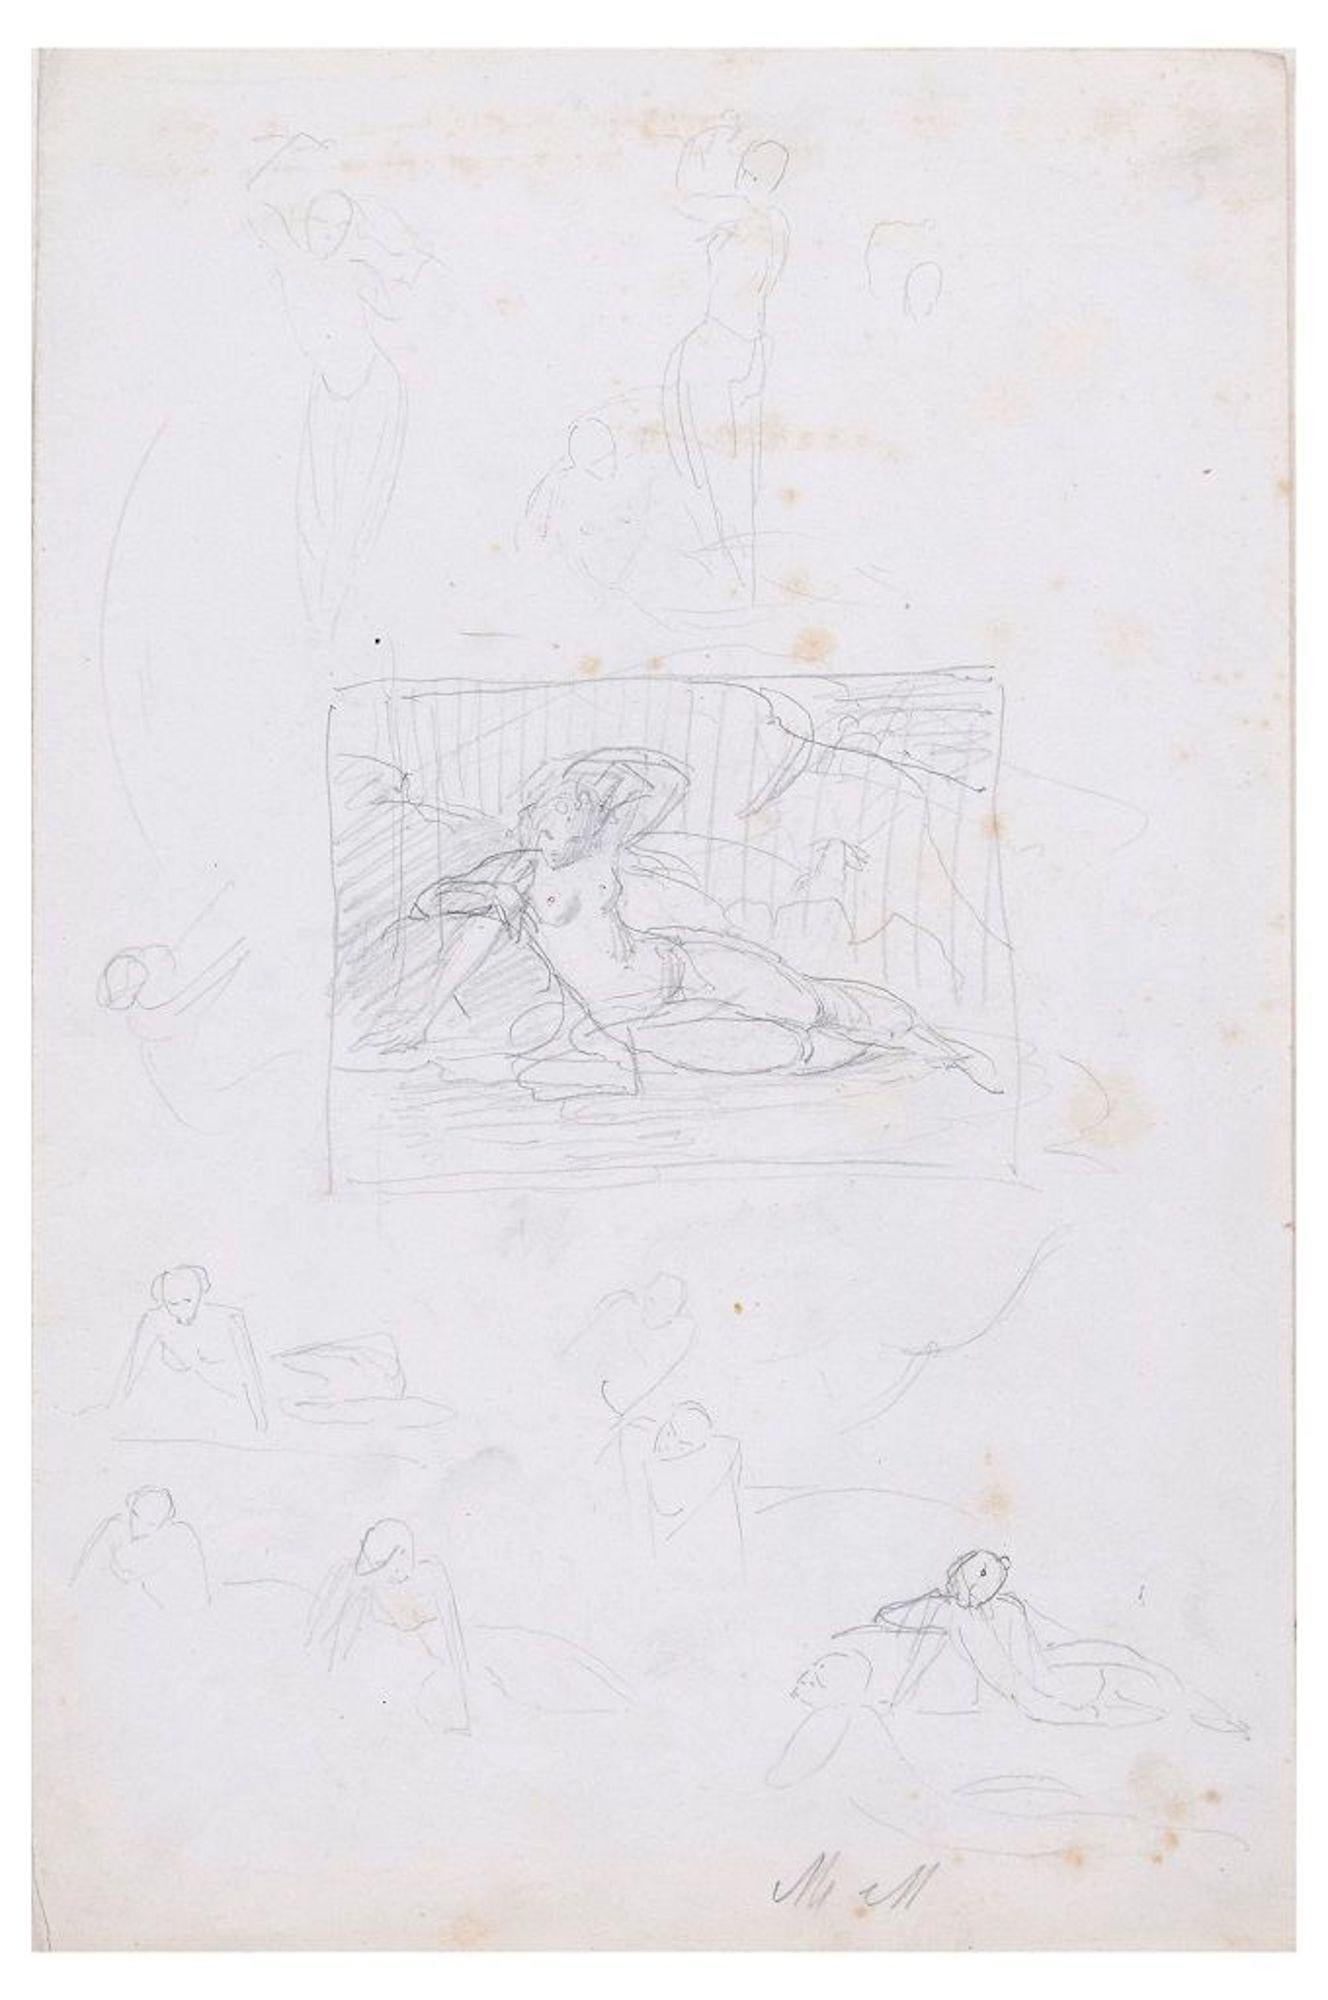 Unknown Figurative Art - Composition with Nude Woman - Original Pencil Drawing Early 20th Century